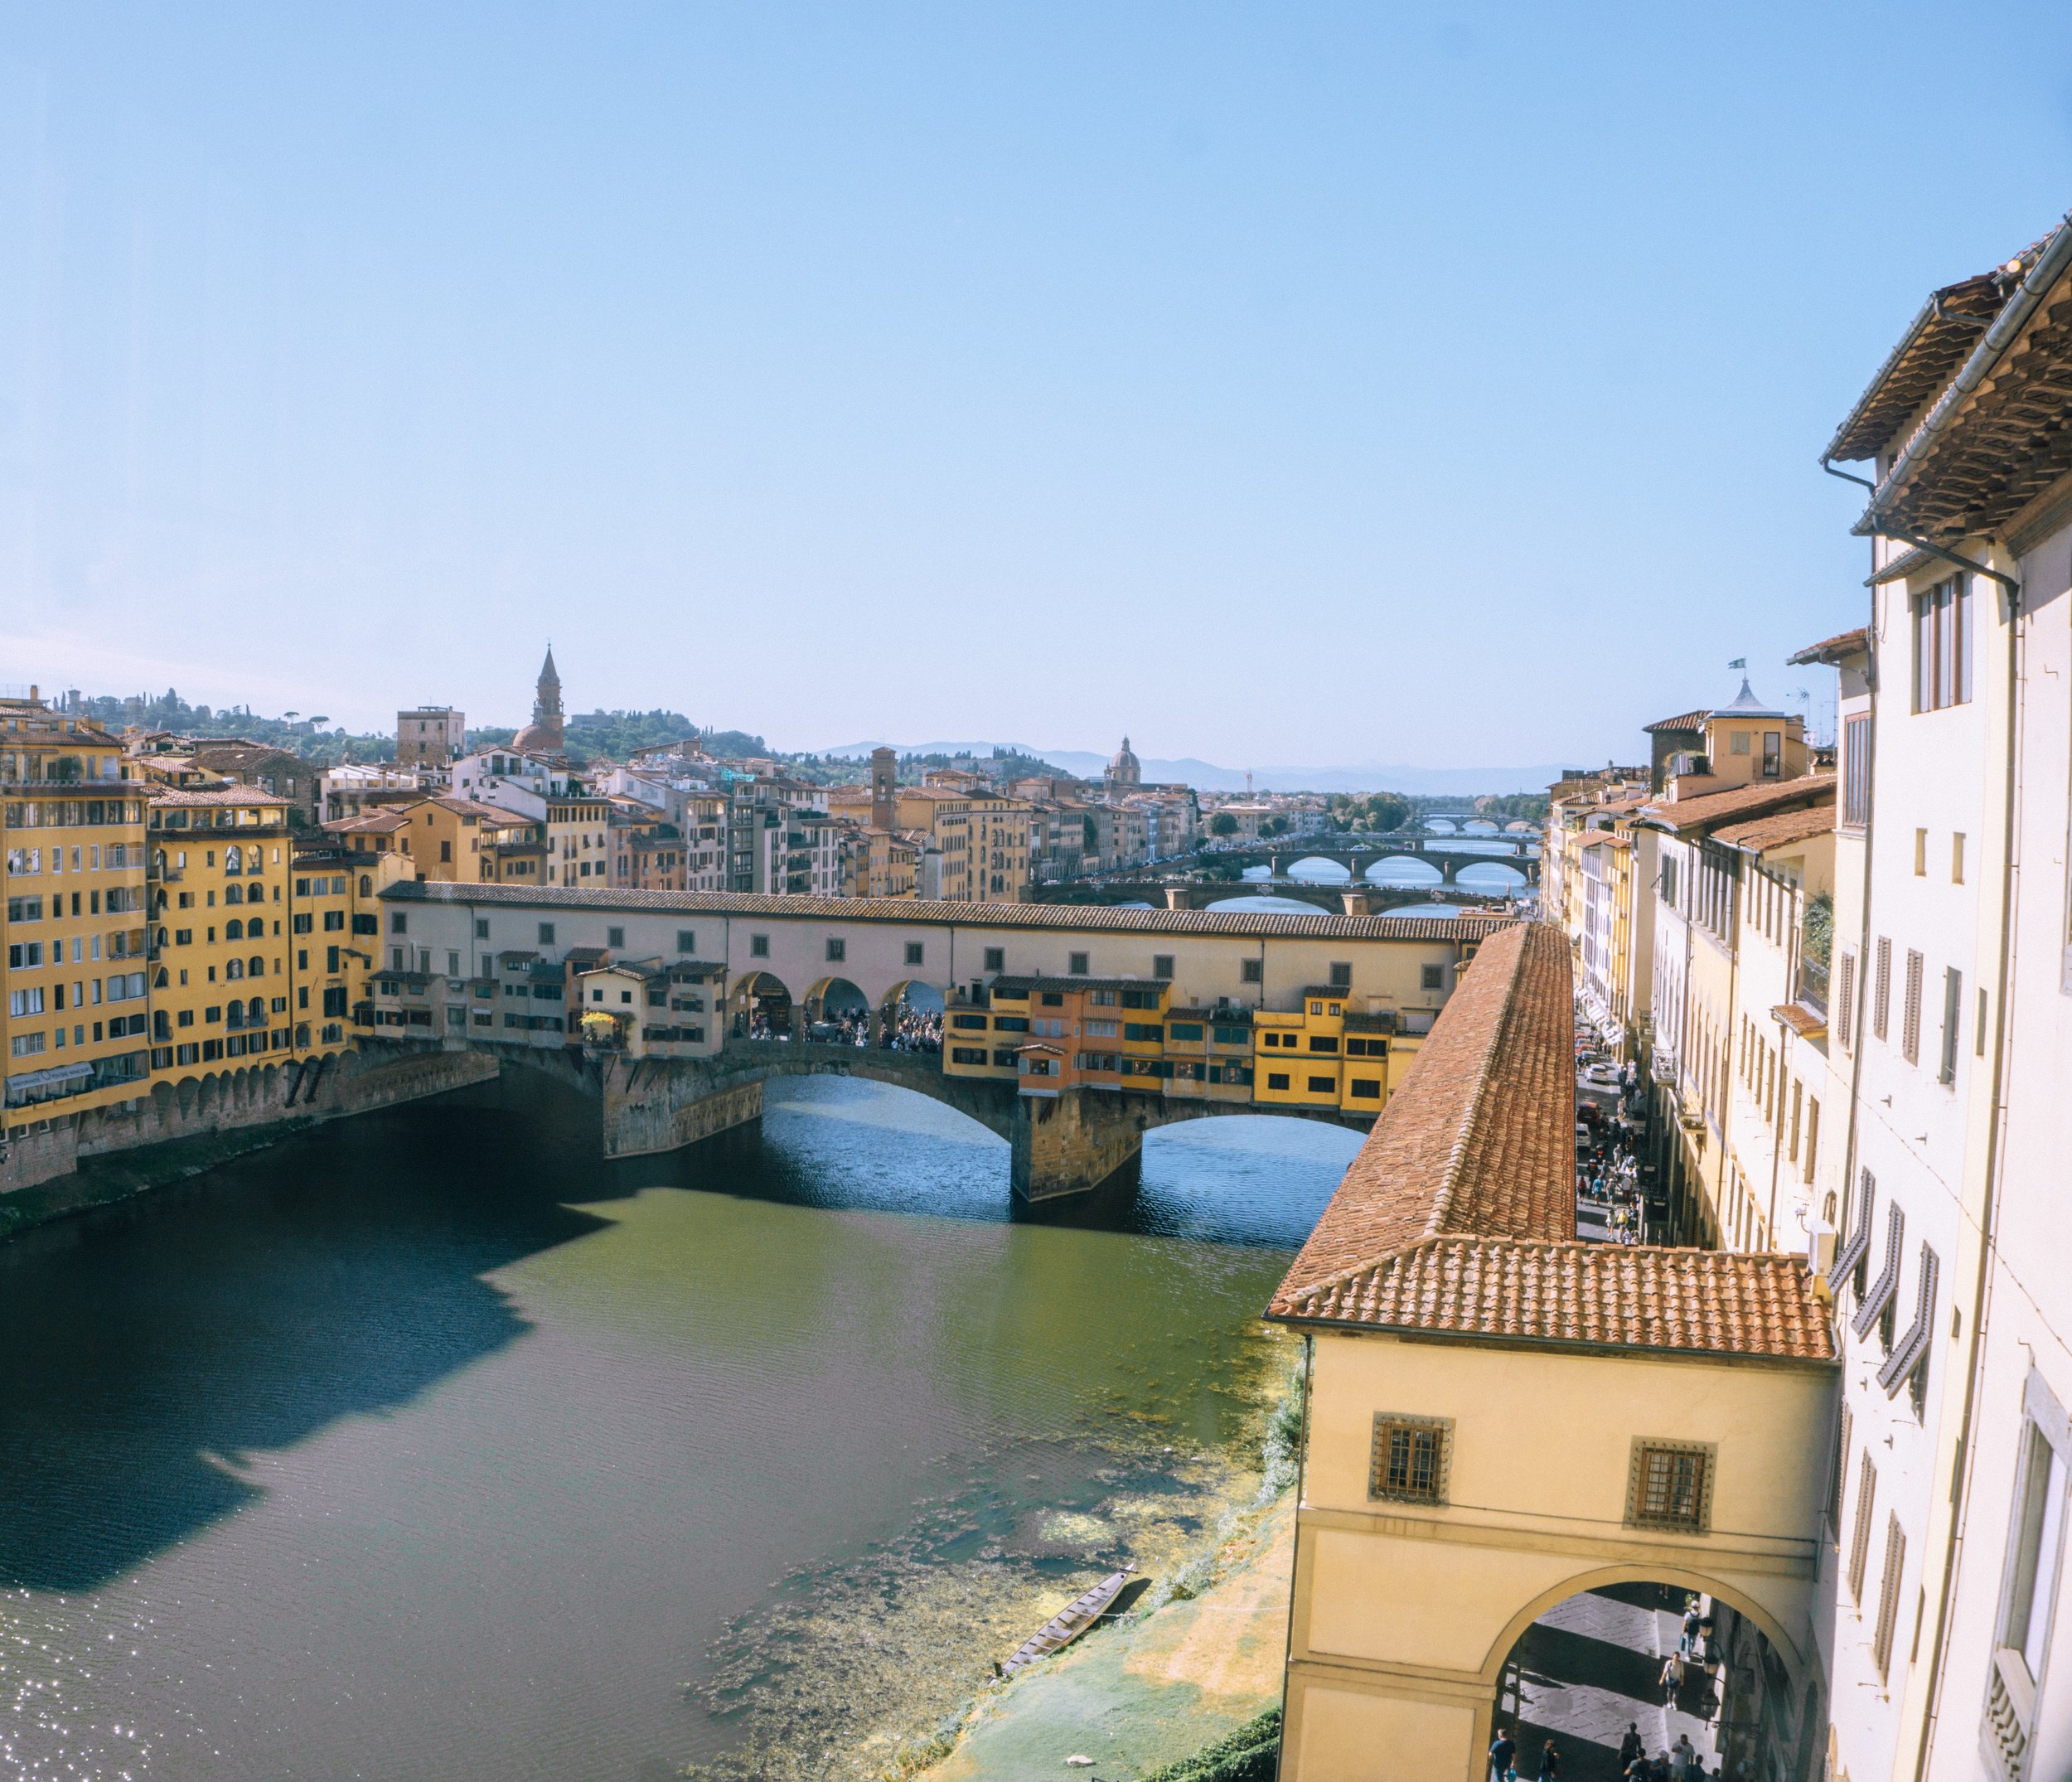 The canals are actually out of a fairytale… and the Ponte Vecchio or (old bridge) is as strikingly beautiful as it is old. 